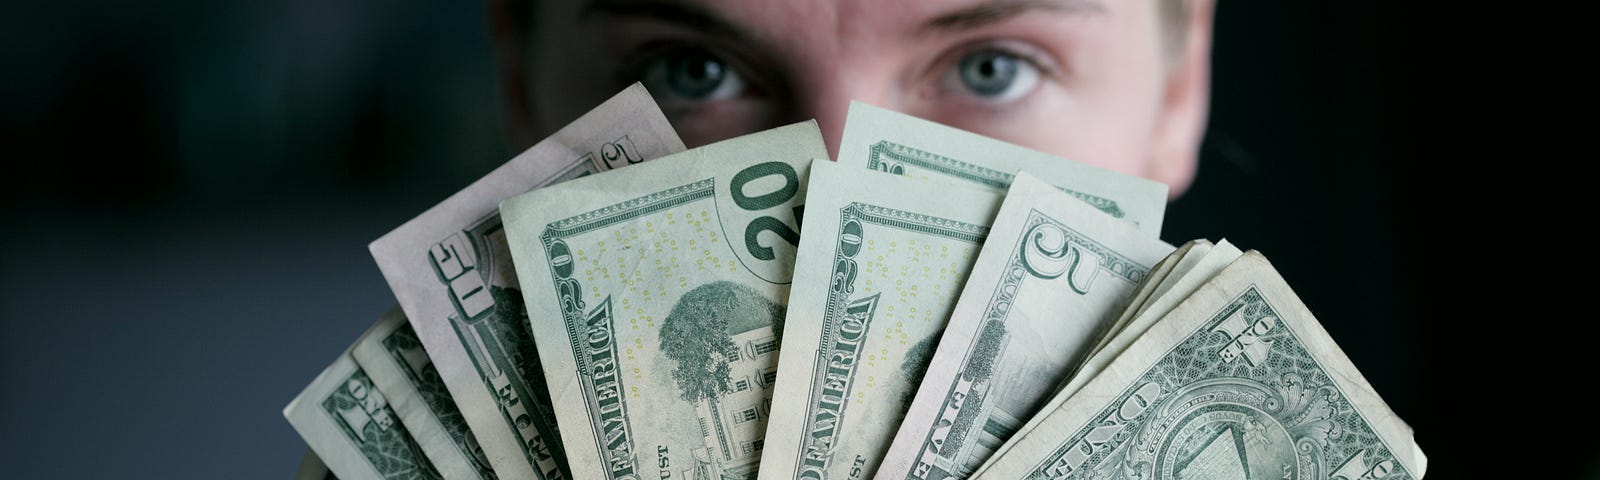 Person holding lots of money in front of their face.